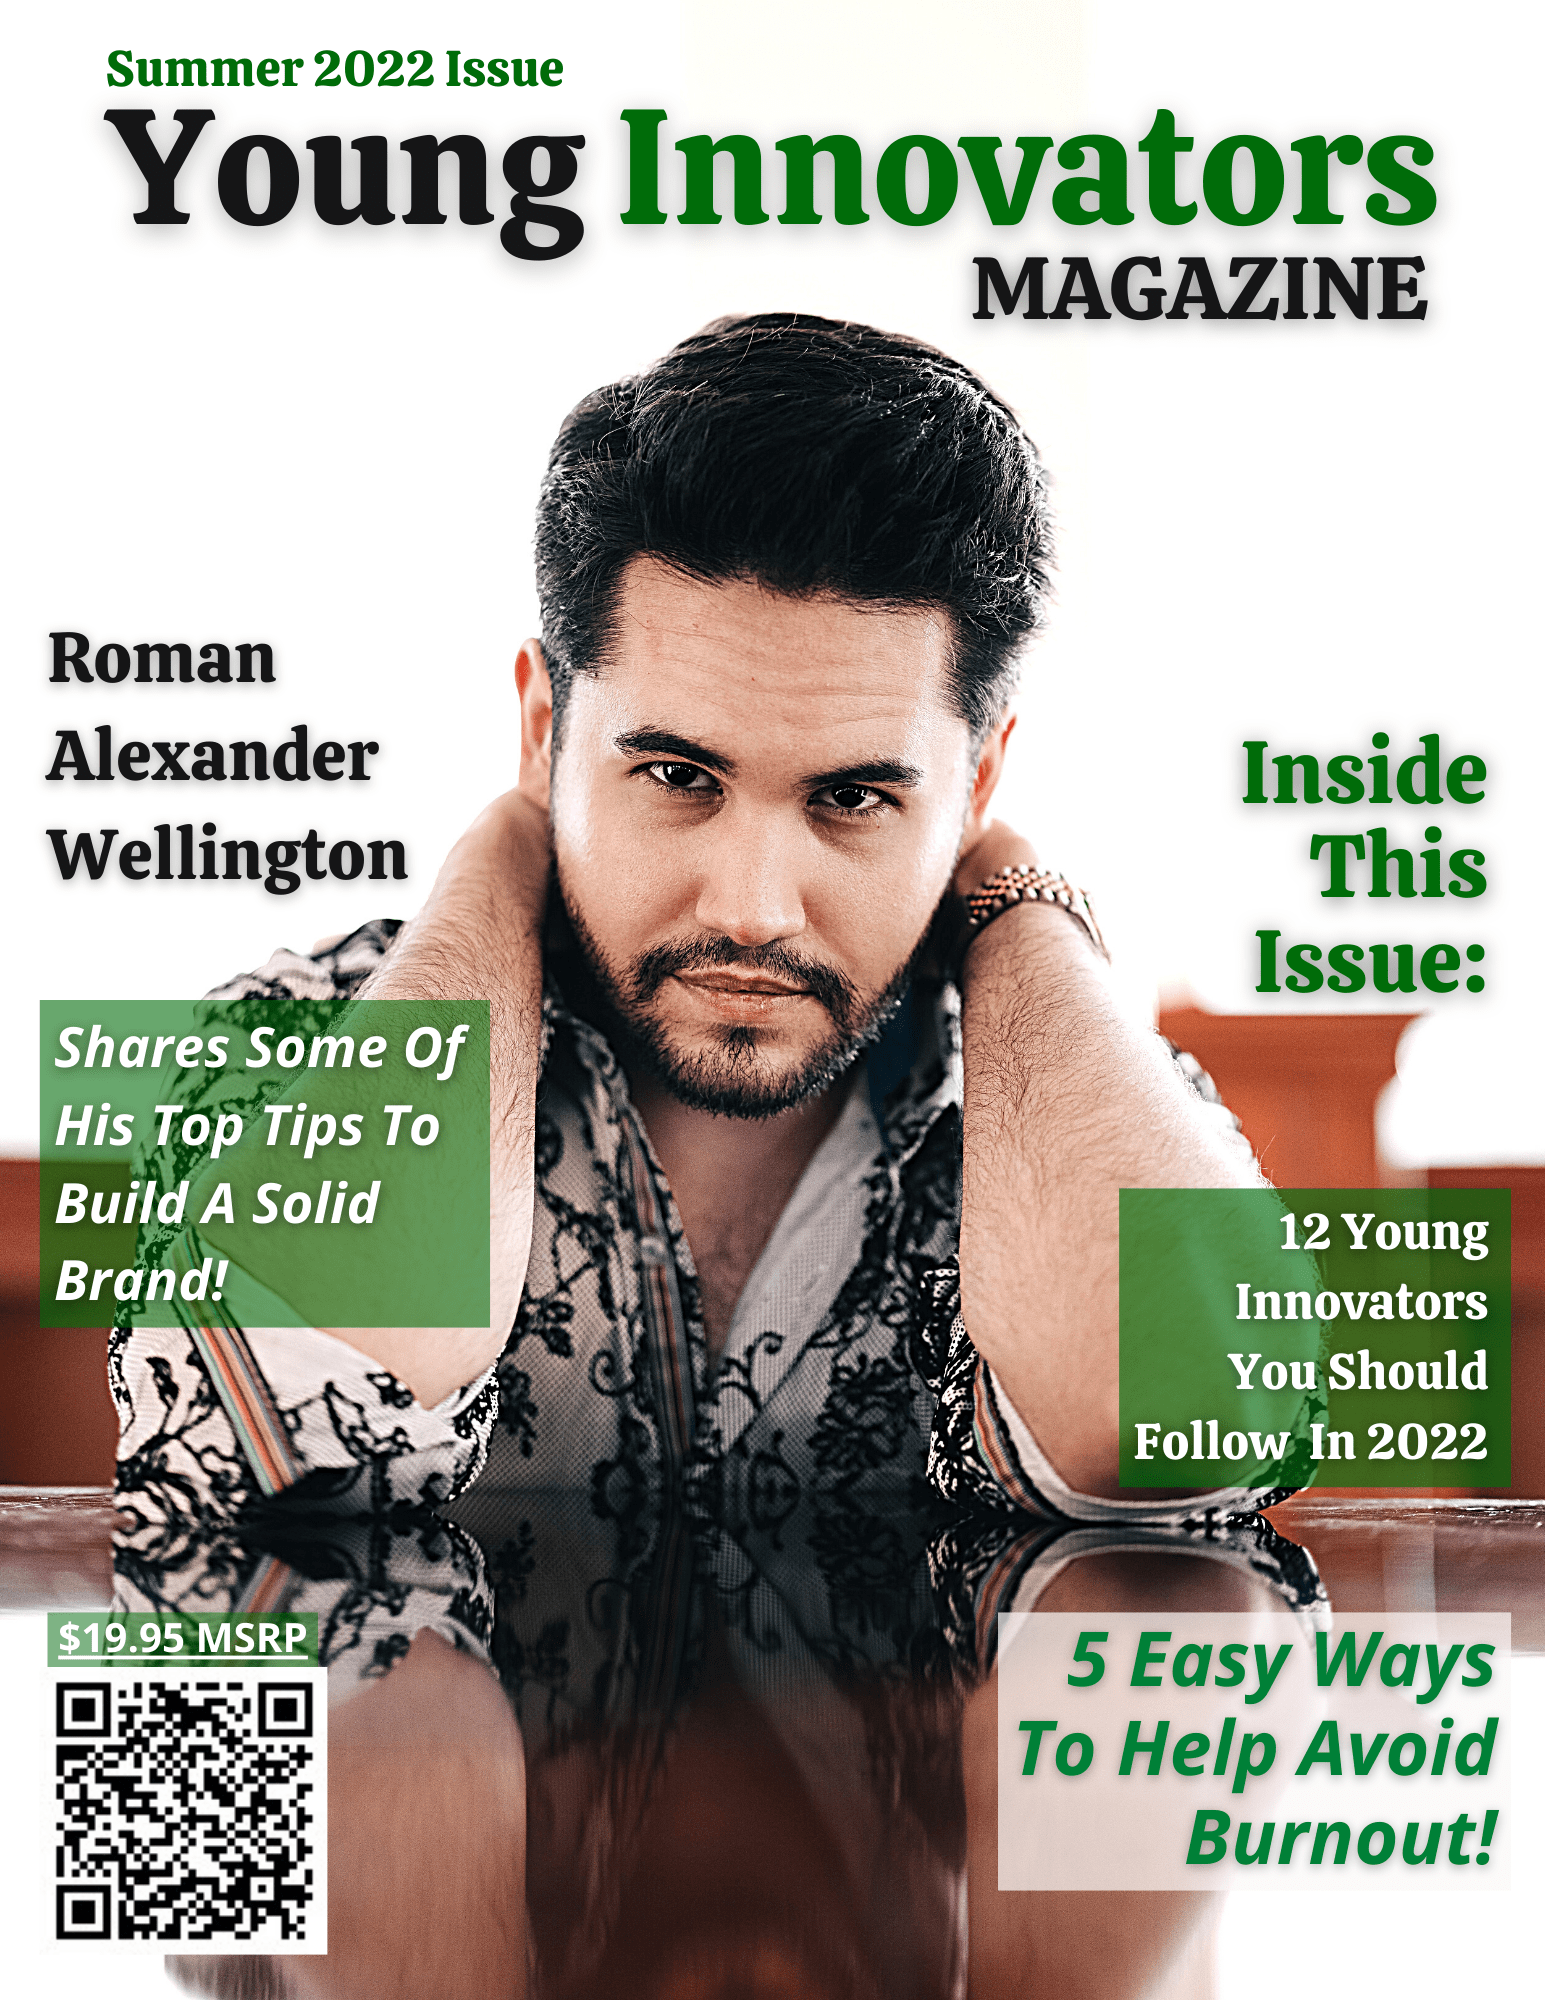 Roman Alexander Wellington On Cover Of Young Innovators Magazine Summer 2022 Edition